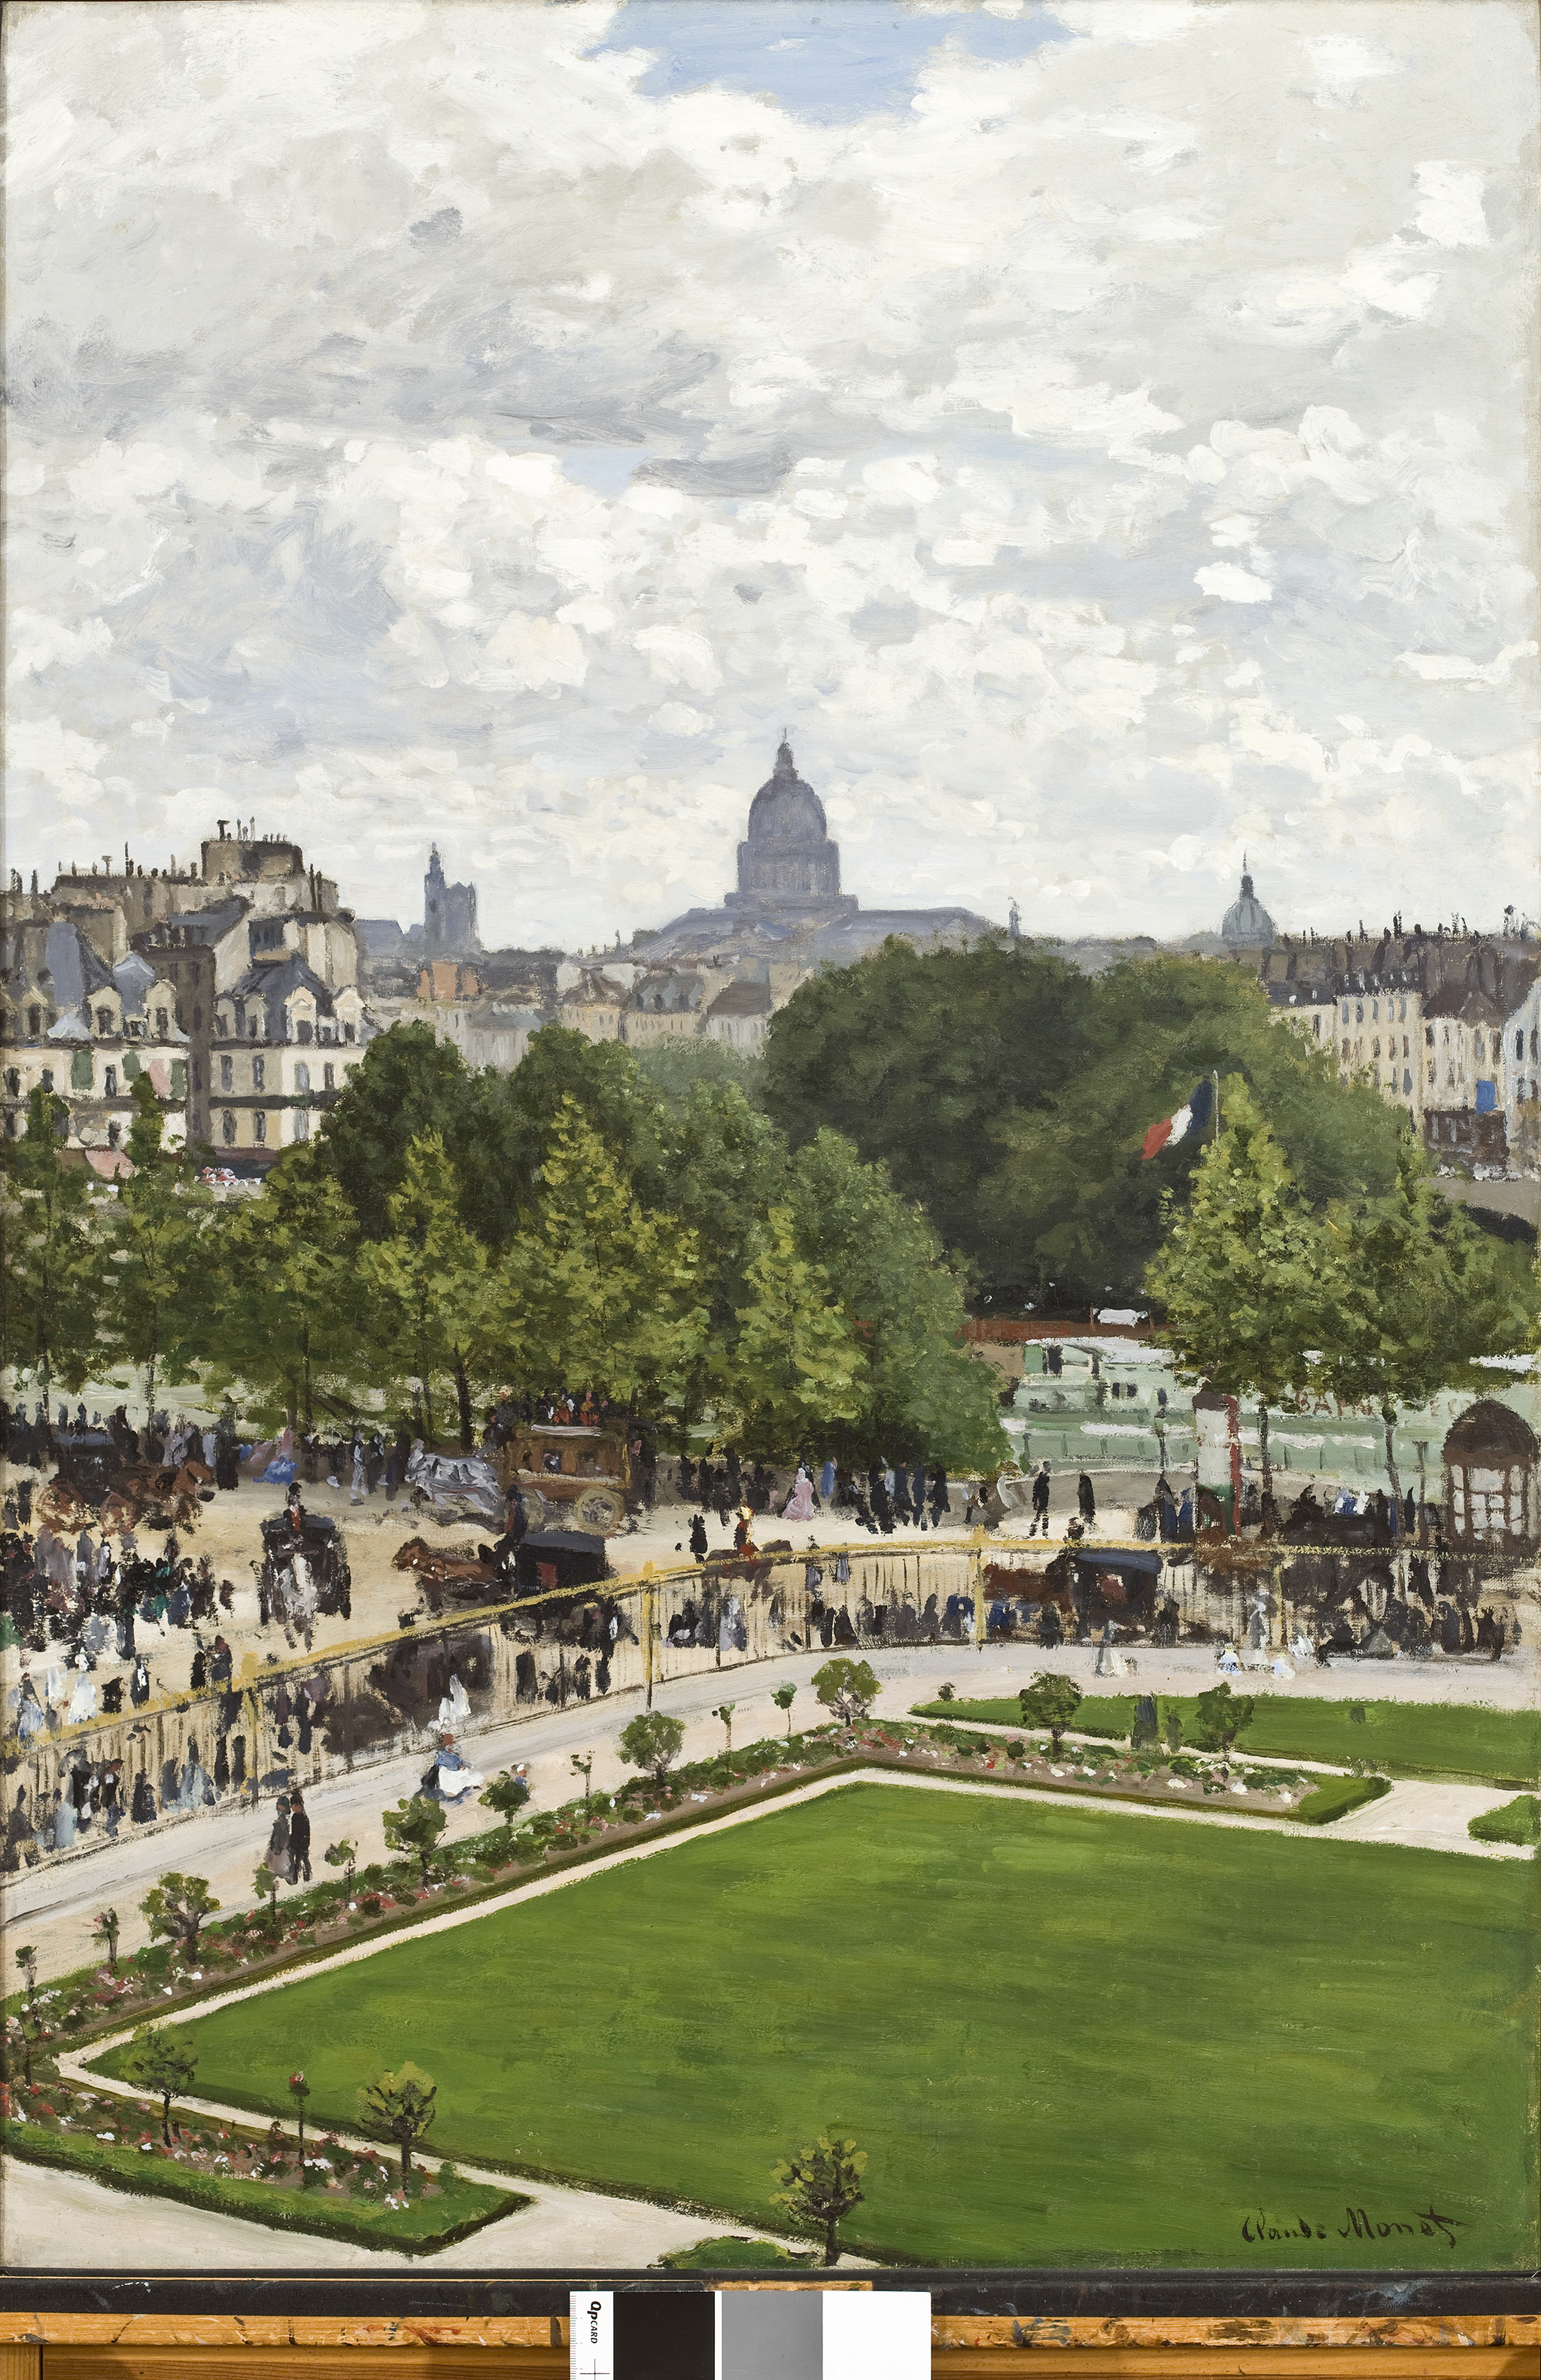 A painting depicting a green garden surrounded by people walking along a road. Behind them is a row of trees which are towered by a skyline of buildings. The sky above them is filled with white clouds.